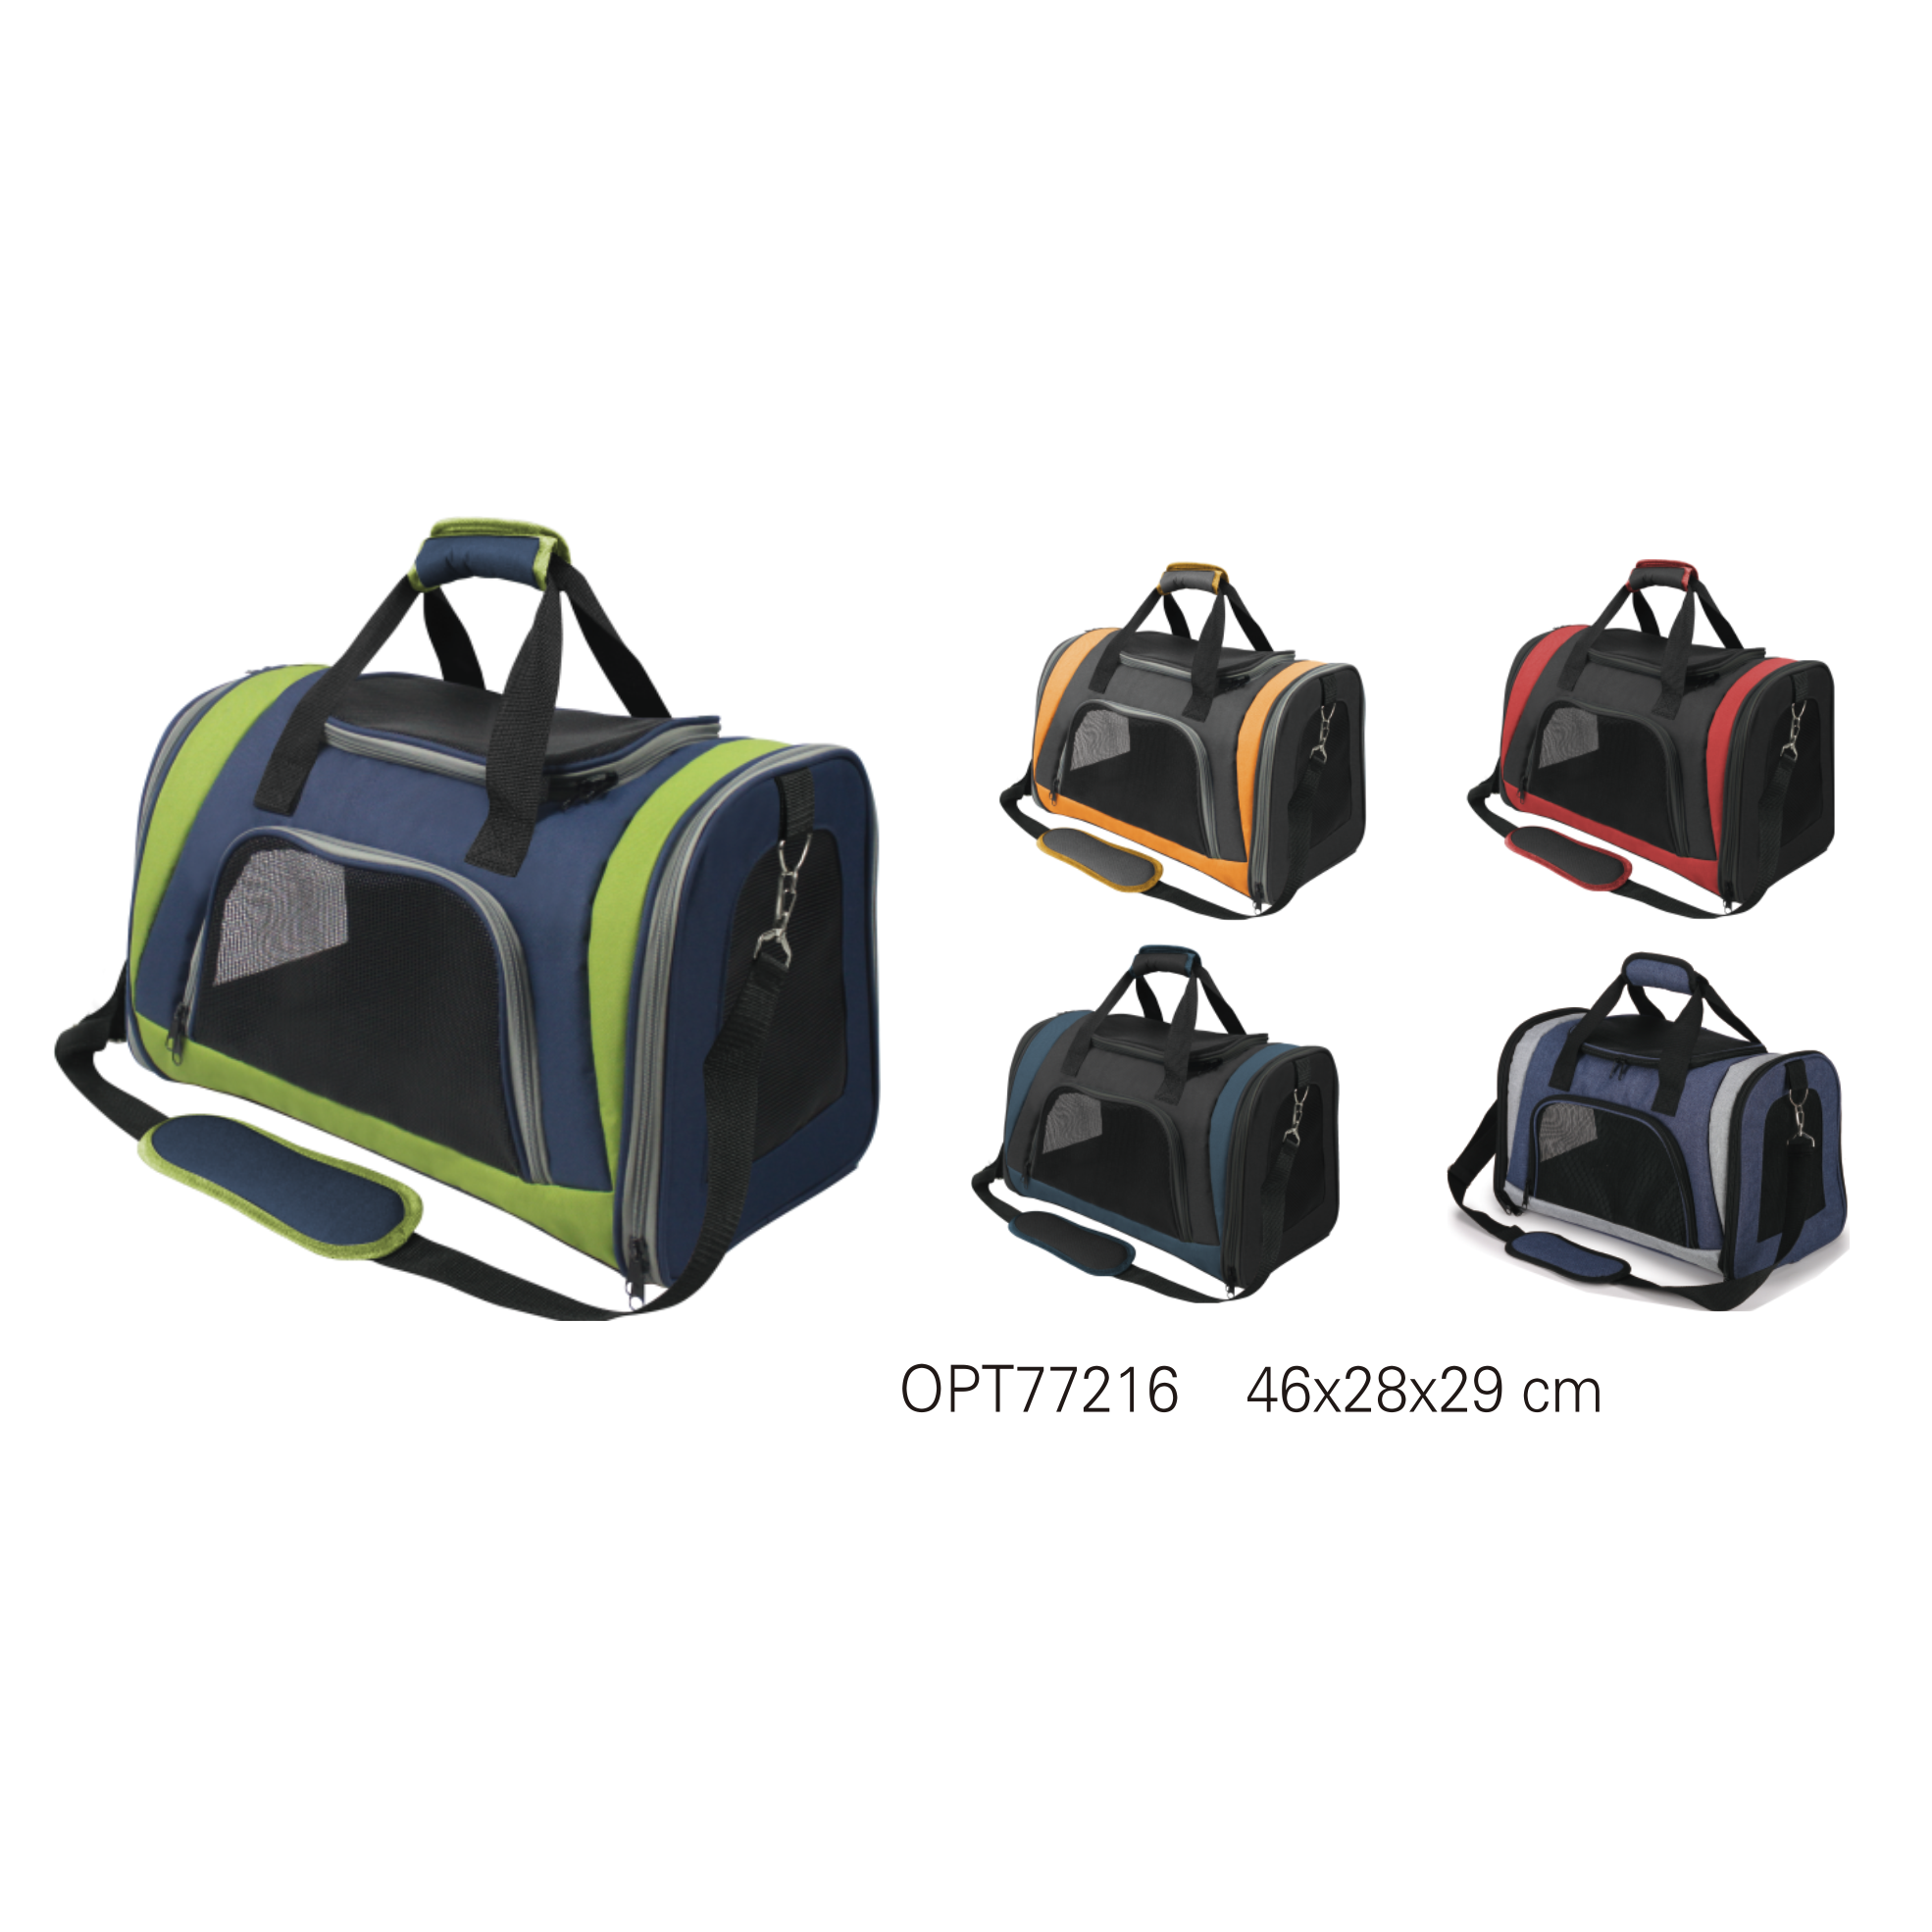 OPT77216 Pet bags & carriers